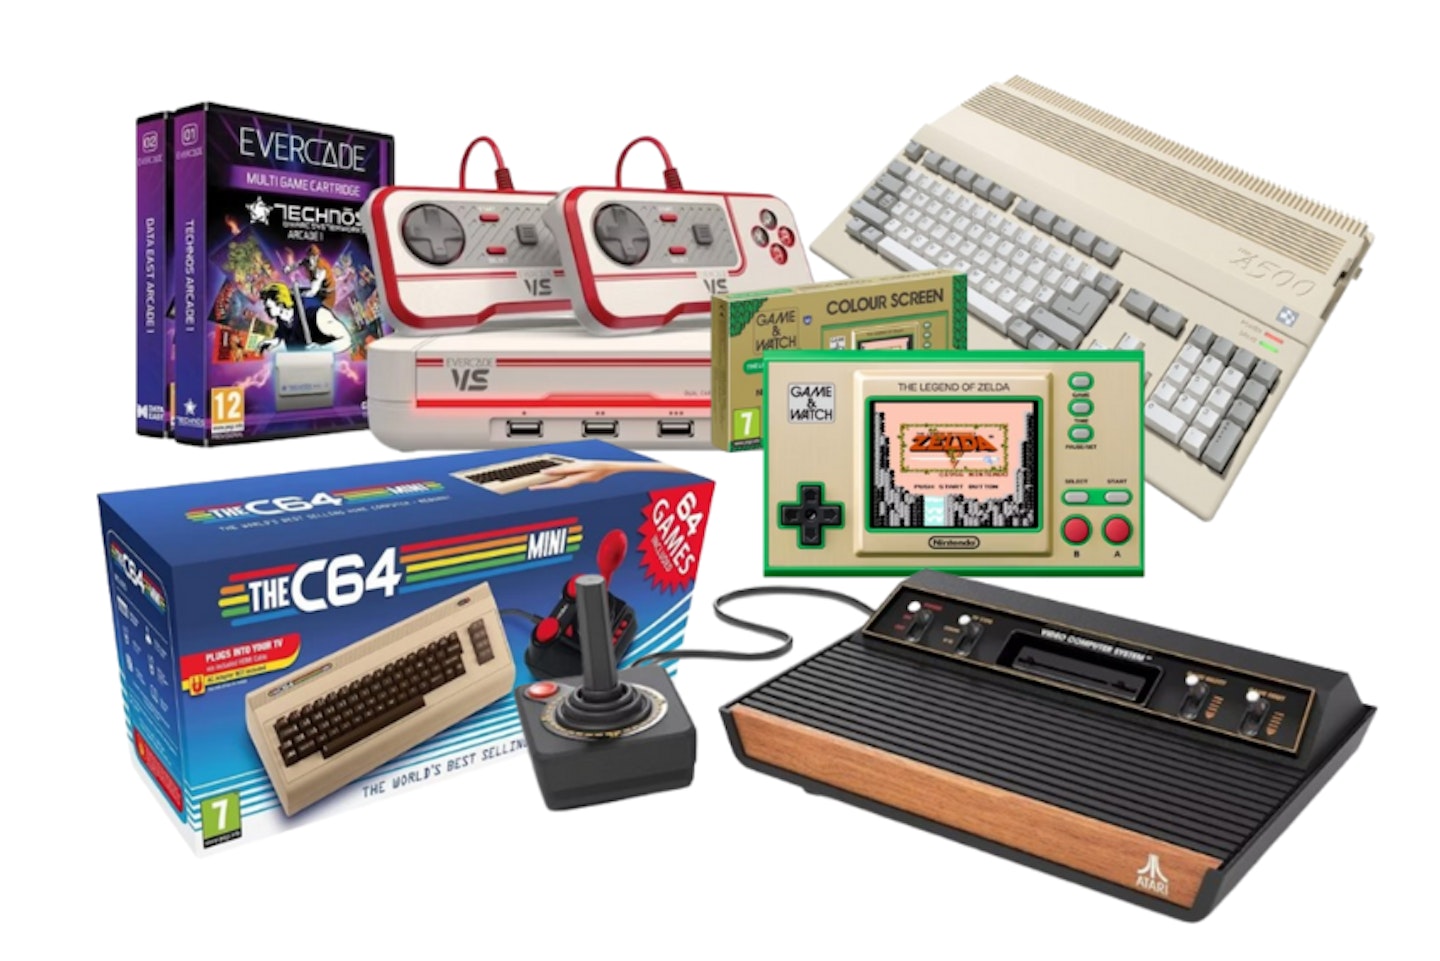 SEVERAL OF THE LATEST RETRO GAME CONSOLES